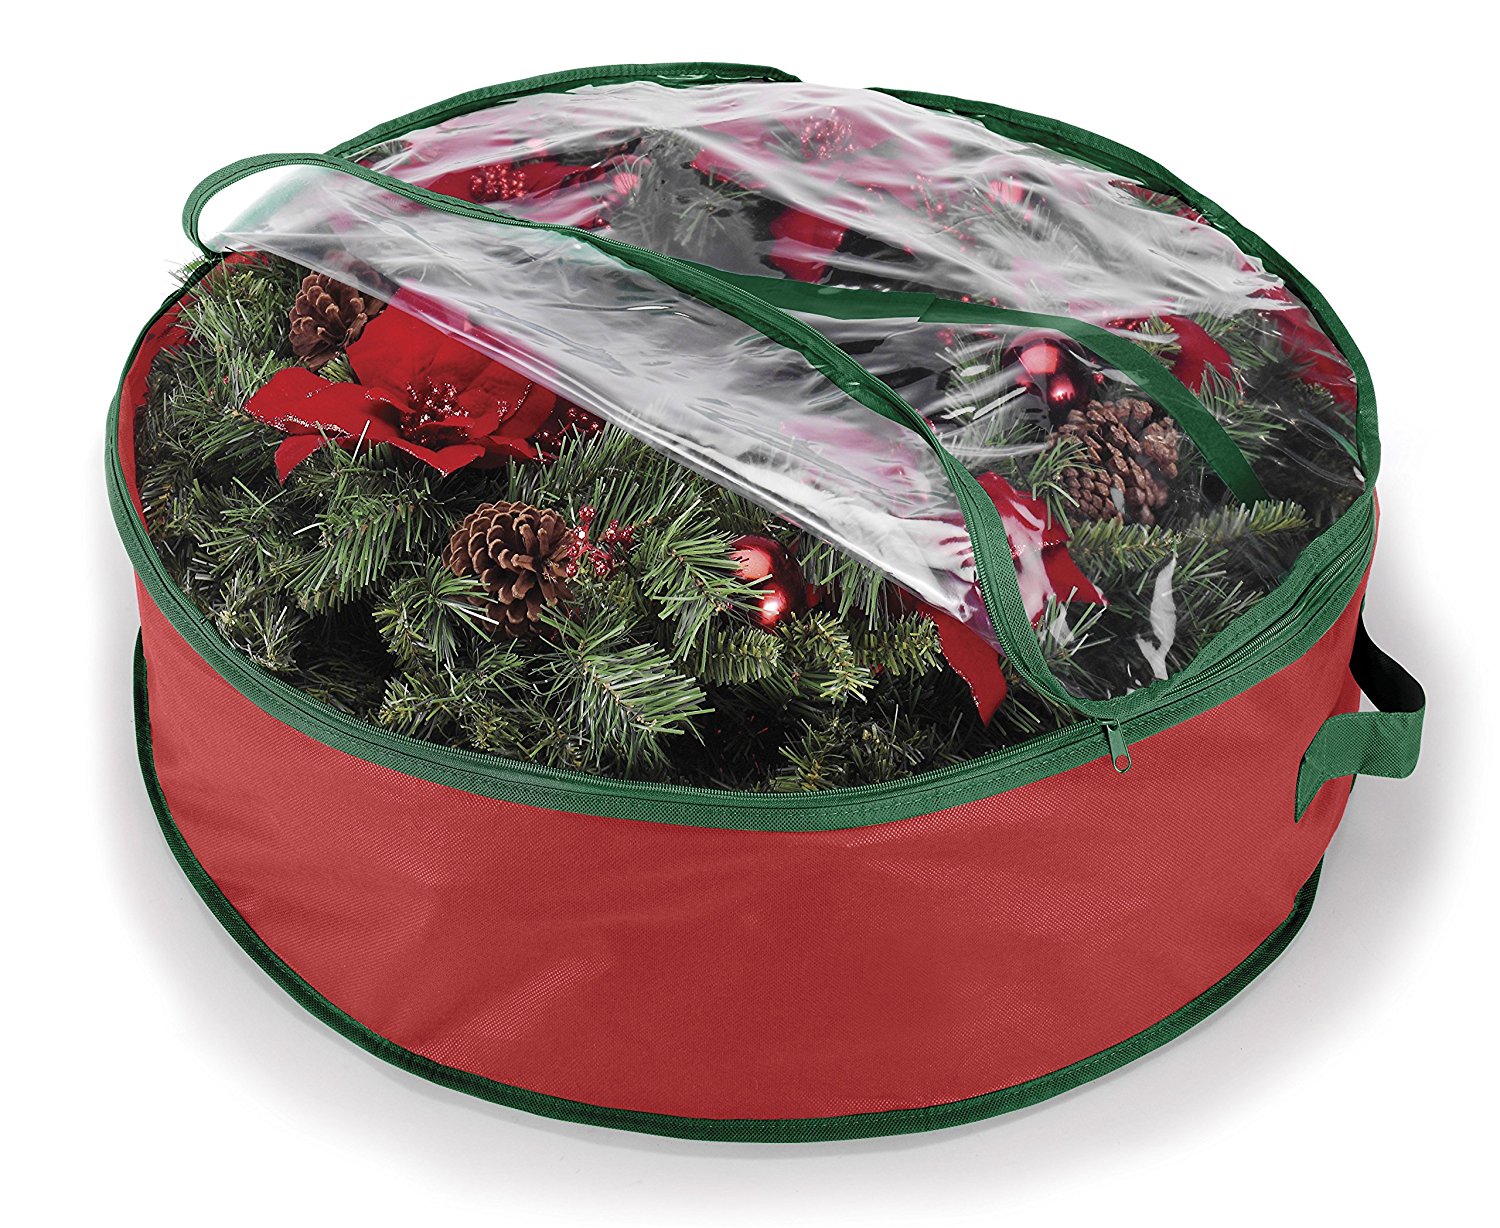 Christmas wreath inside a round storage container.